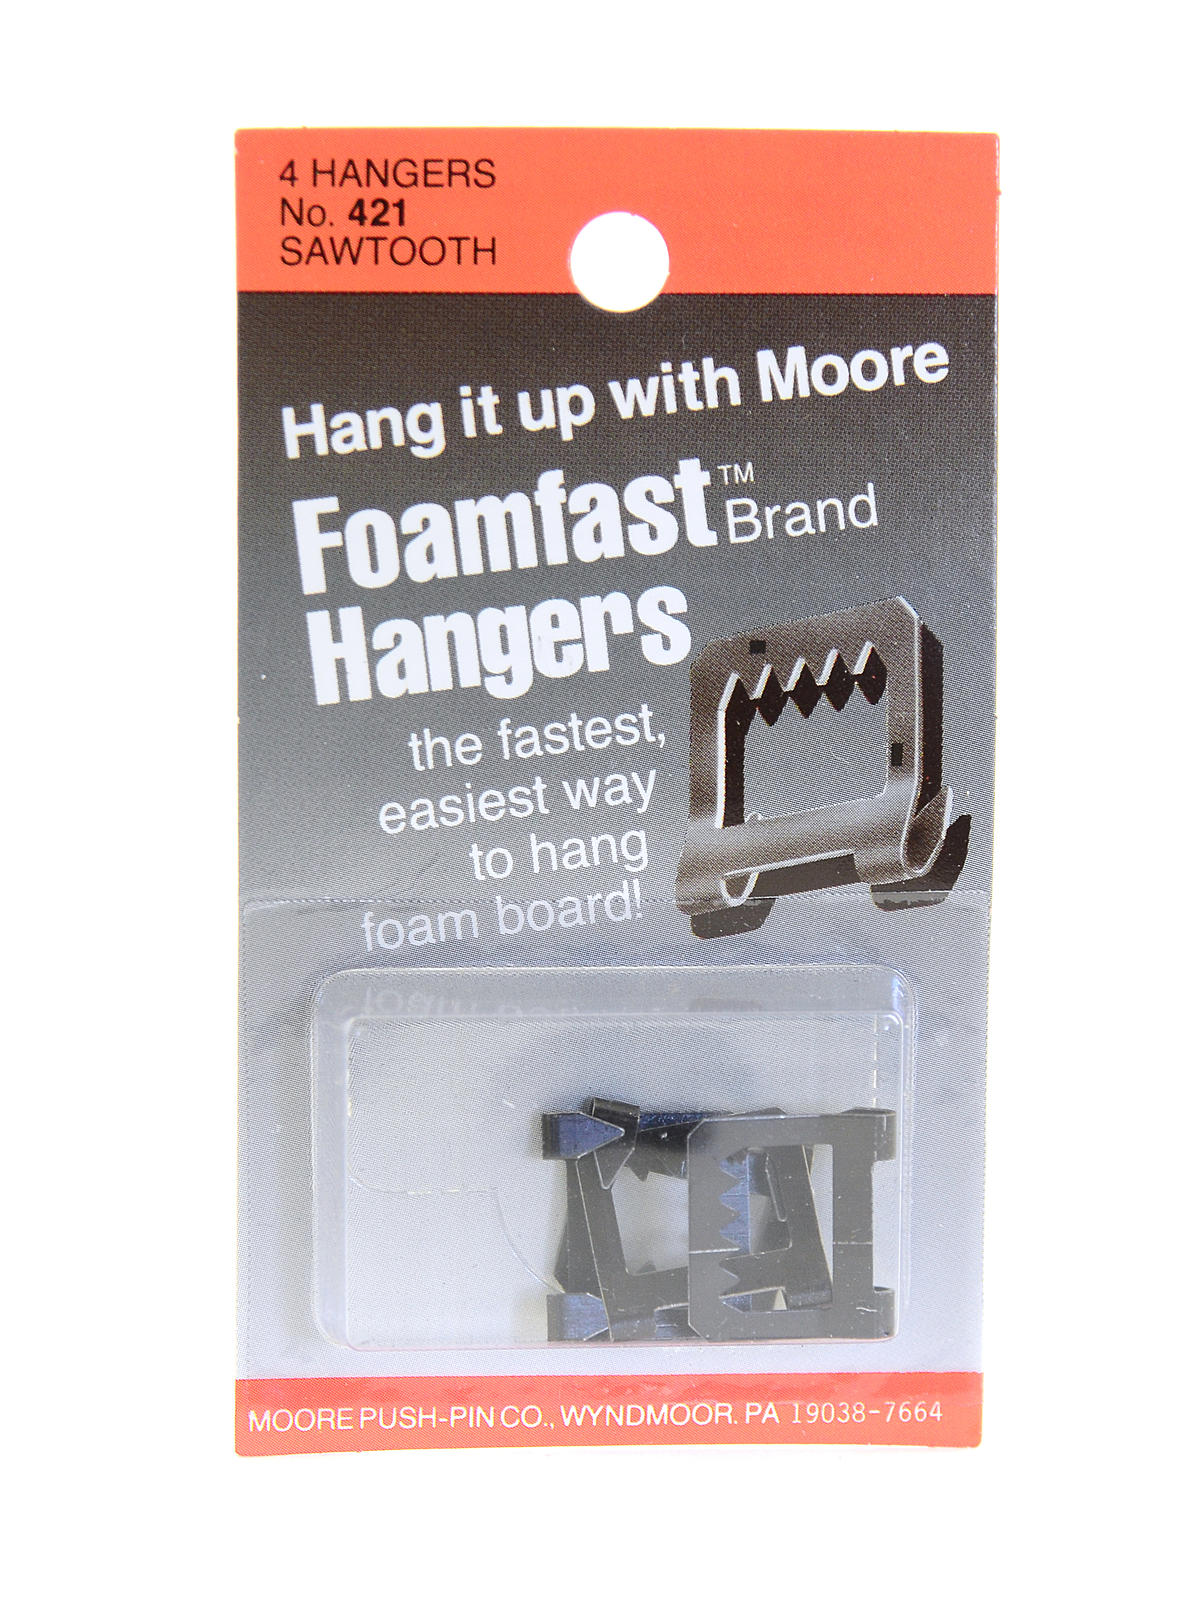 Foamfast Hangers Saw Tooth Hangers Pack Of 4